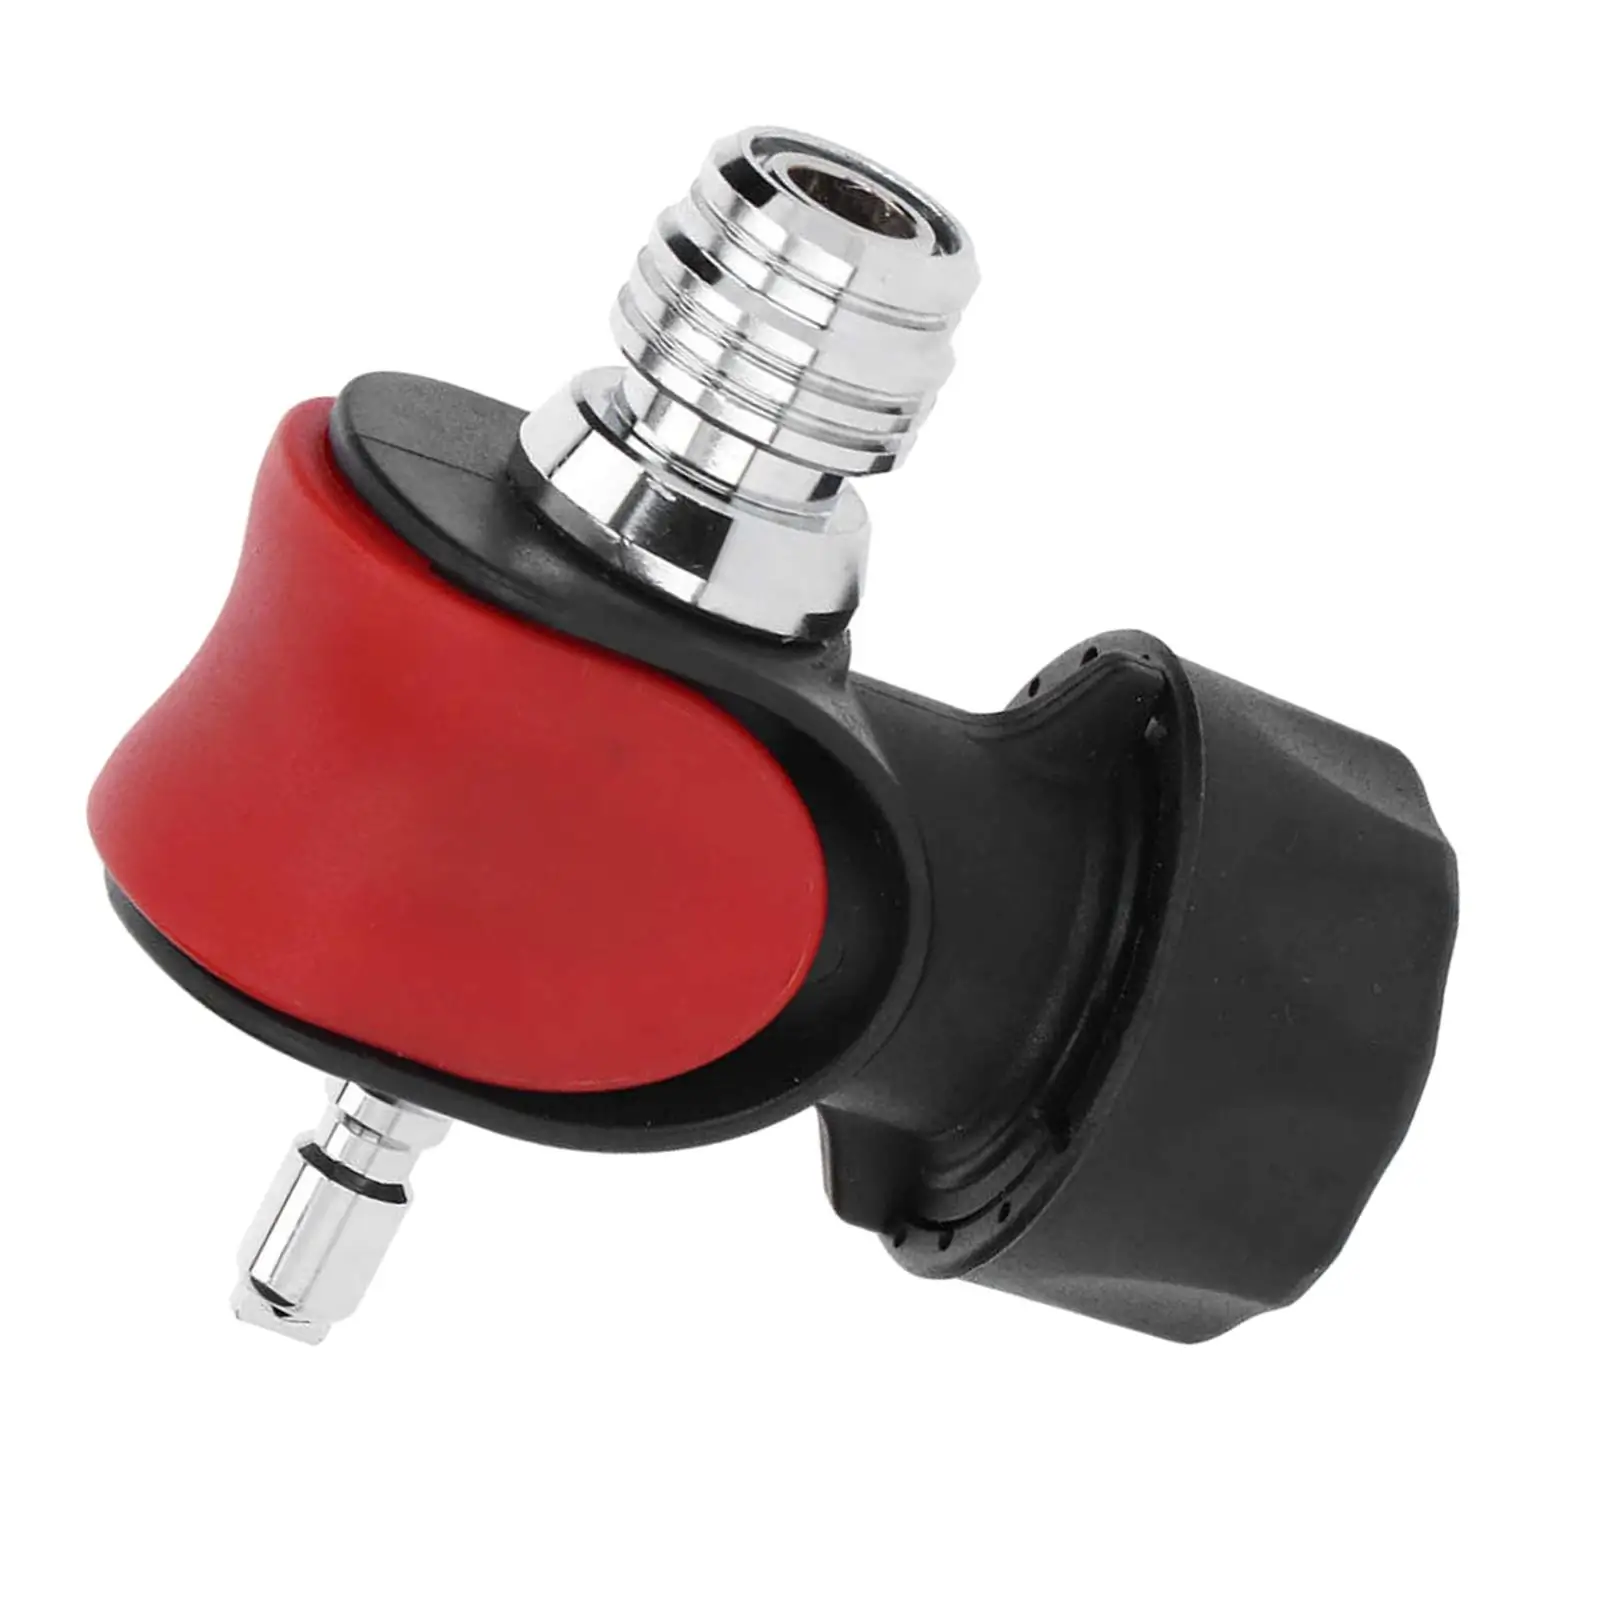 Scuba Diving Signal Shaker Shaker  Attention for Diving Electric Buzzer